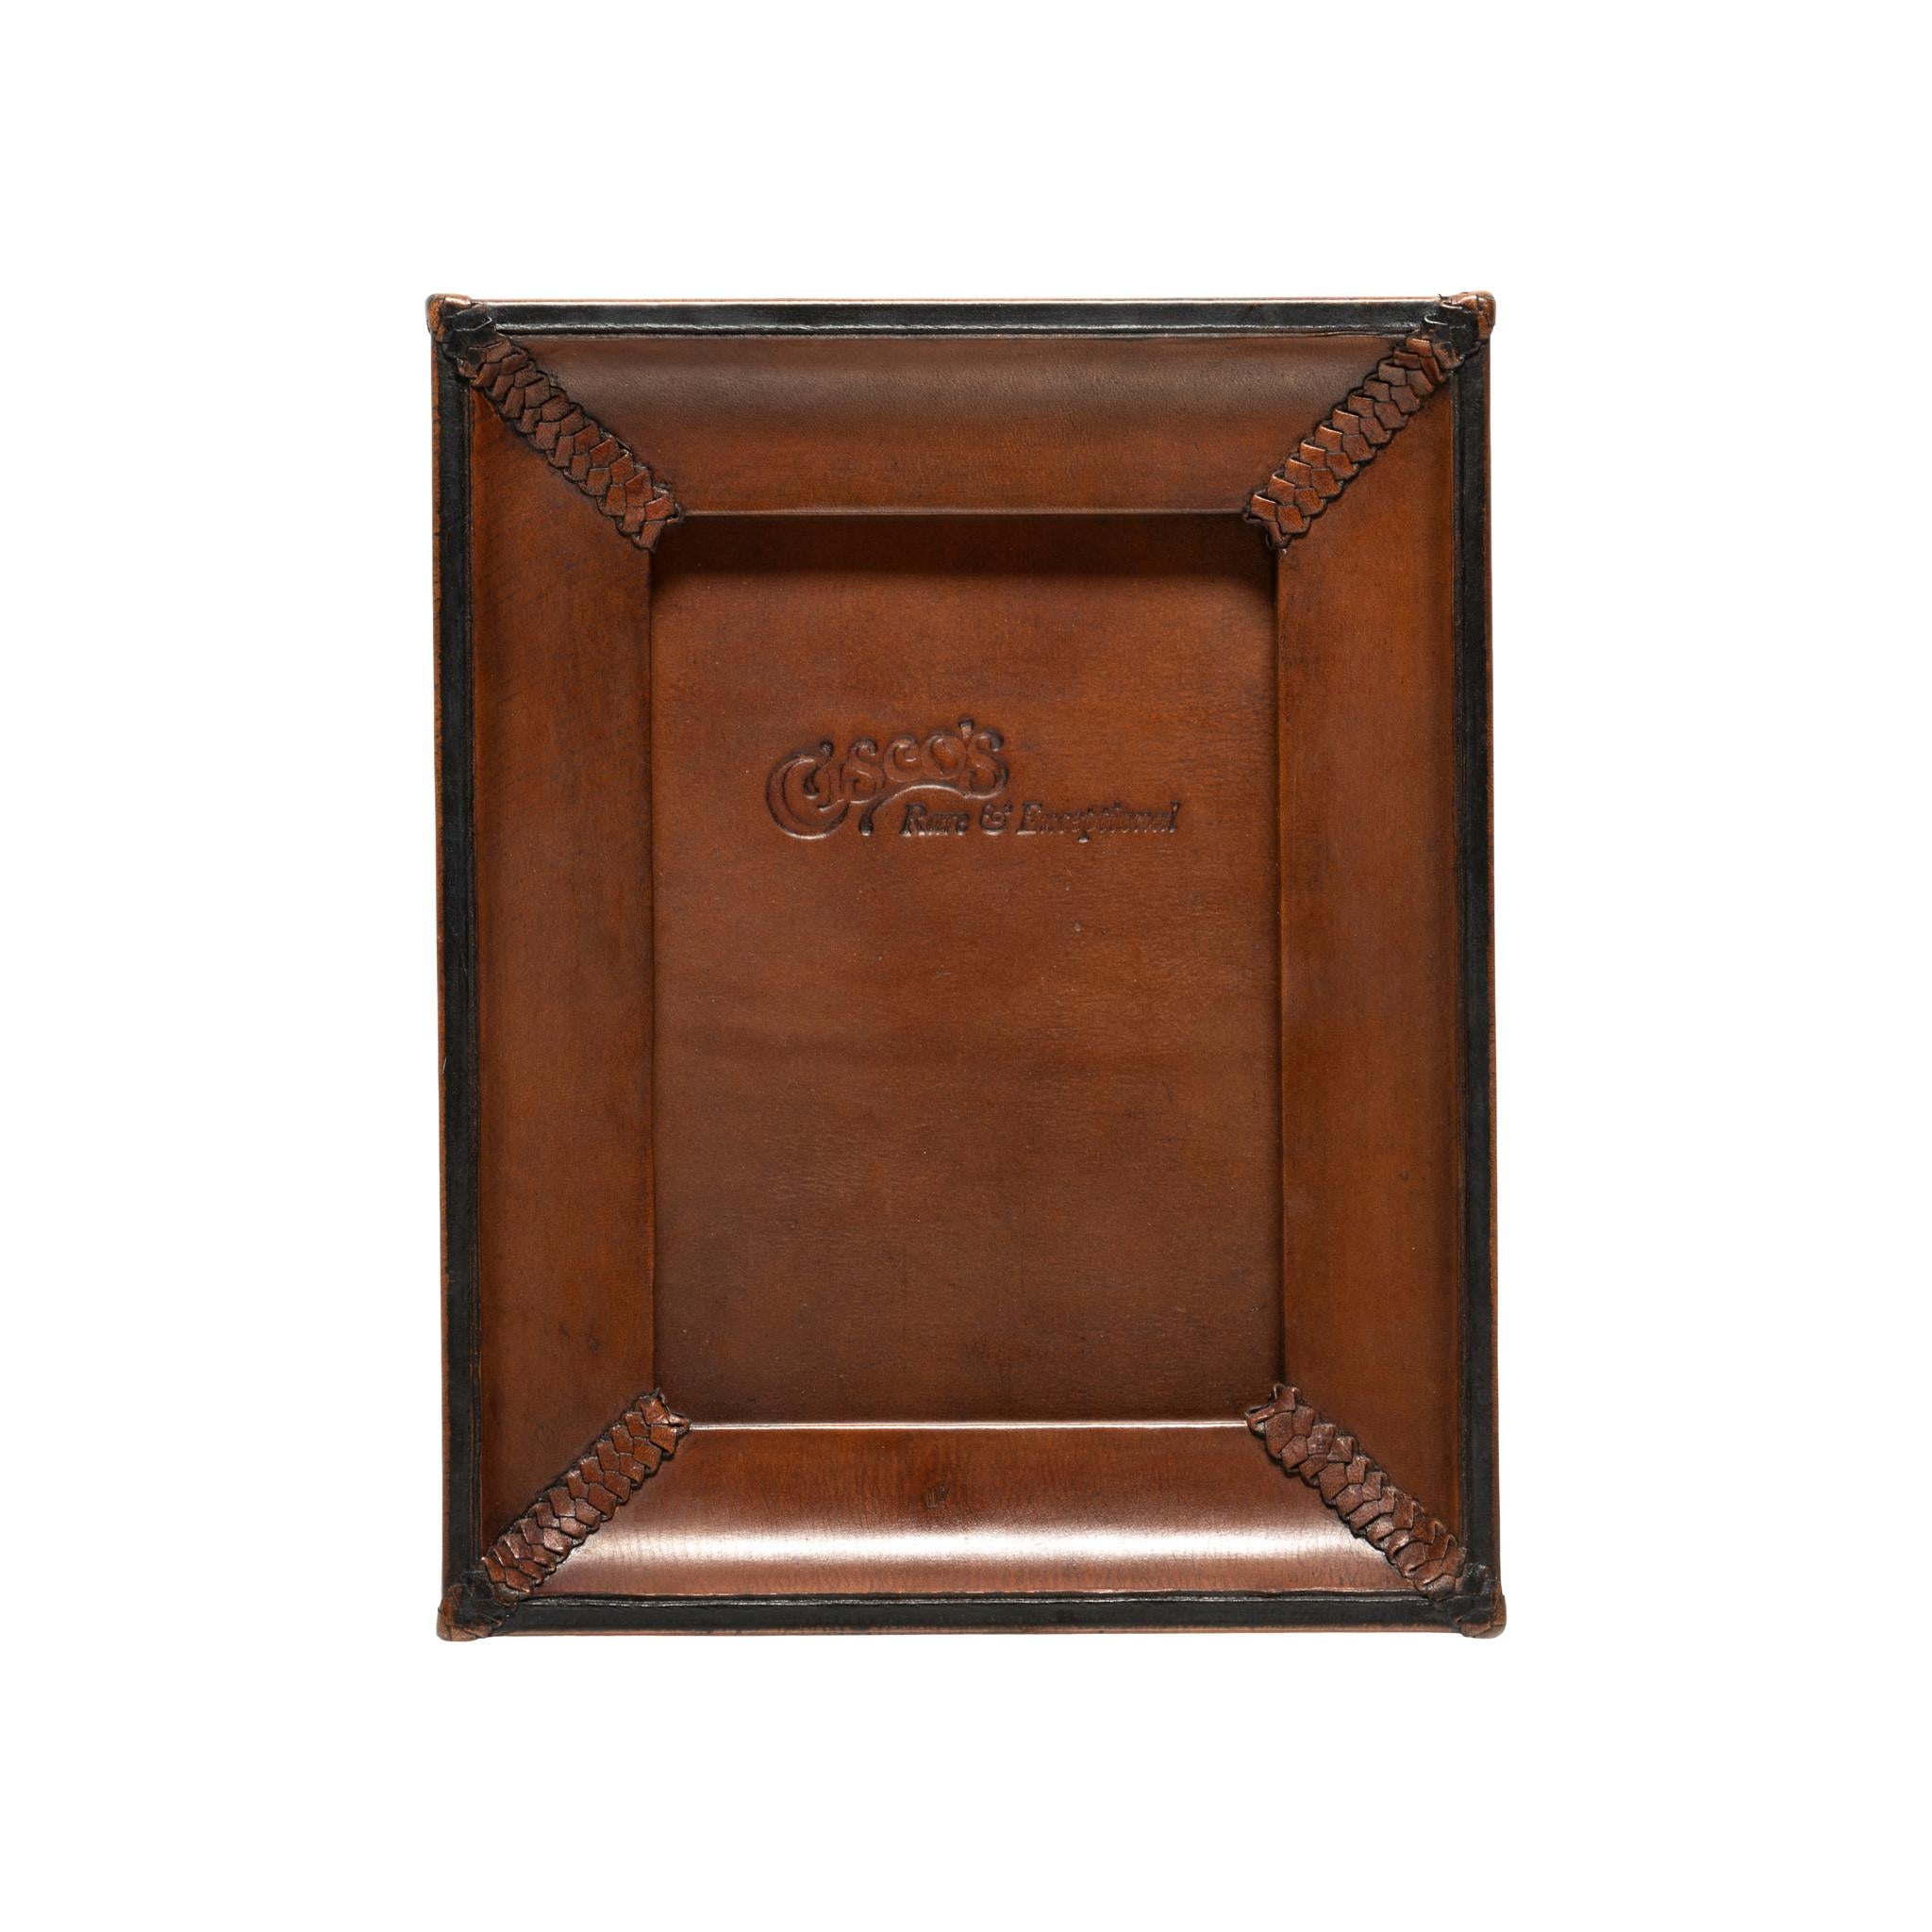 5x7 Medium Brown and Black Leather Tabletop Picture Frame - The Artisan For Sale 2